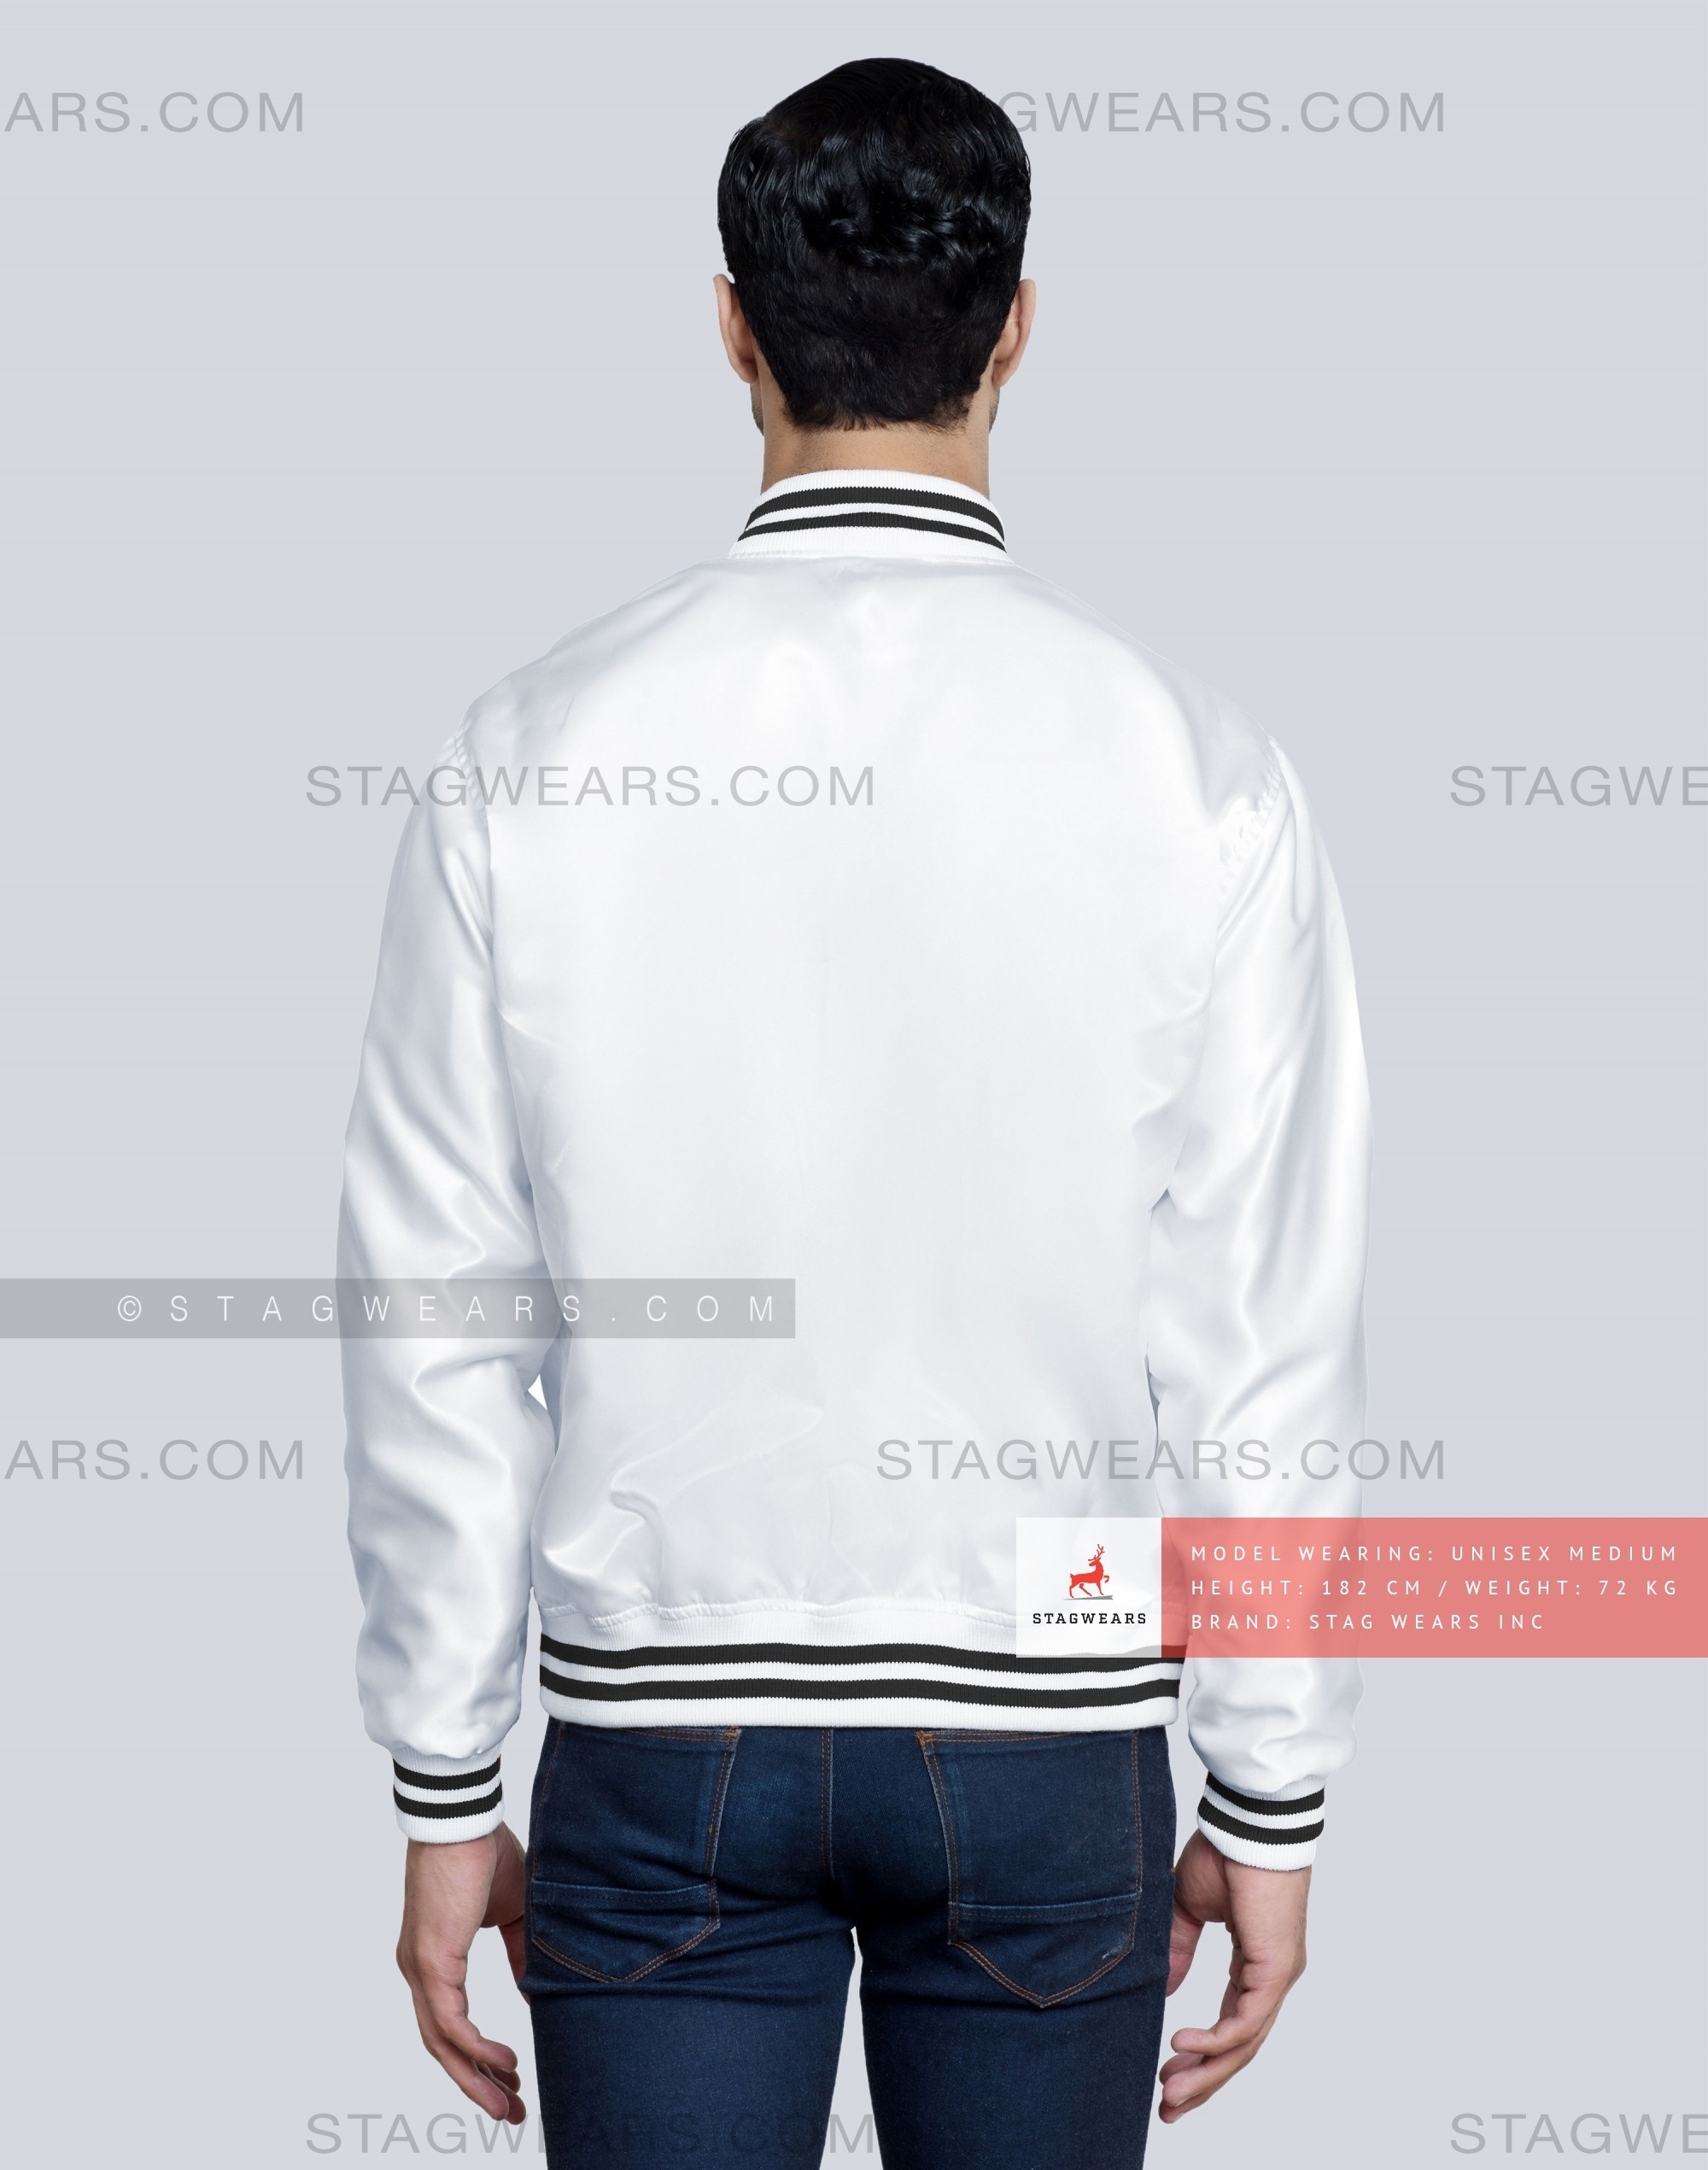 White Satin Baseball Jacket with Black pockets and Knit lines